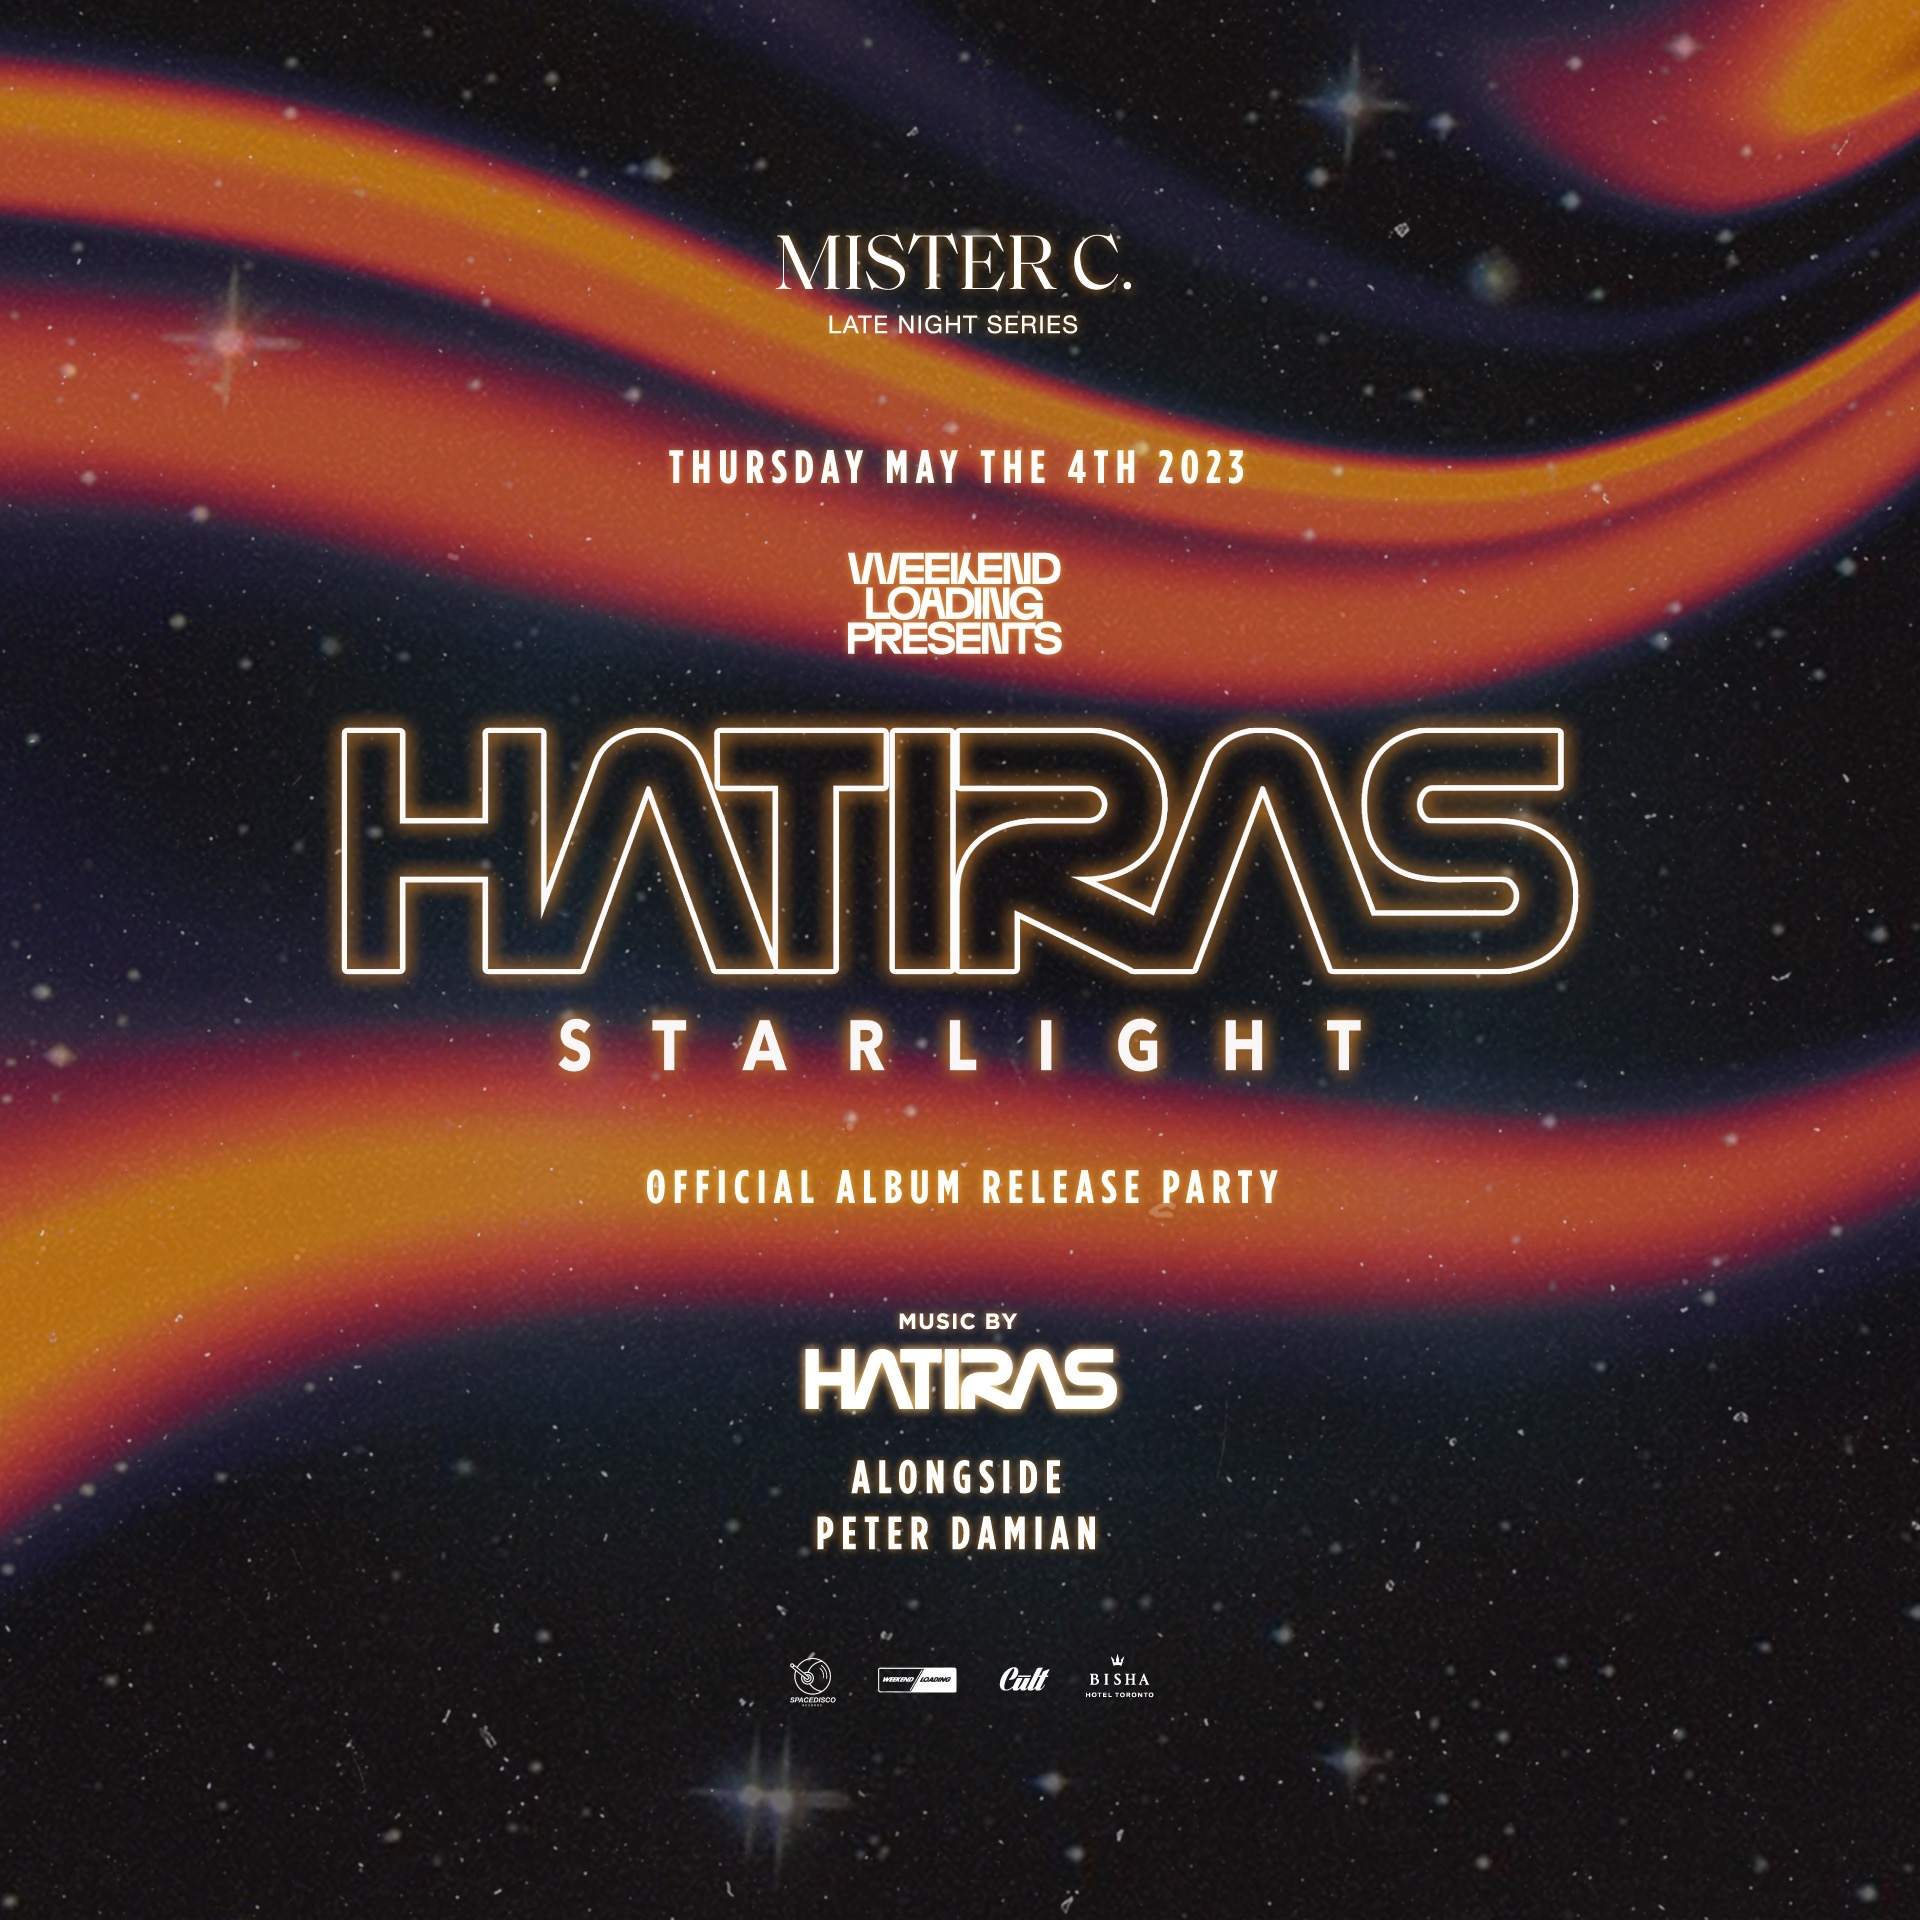 Weekend Loading presents: STARLIGHT - Hatiras: official Album Release Party - Página frontal